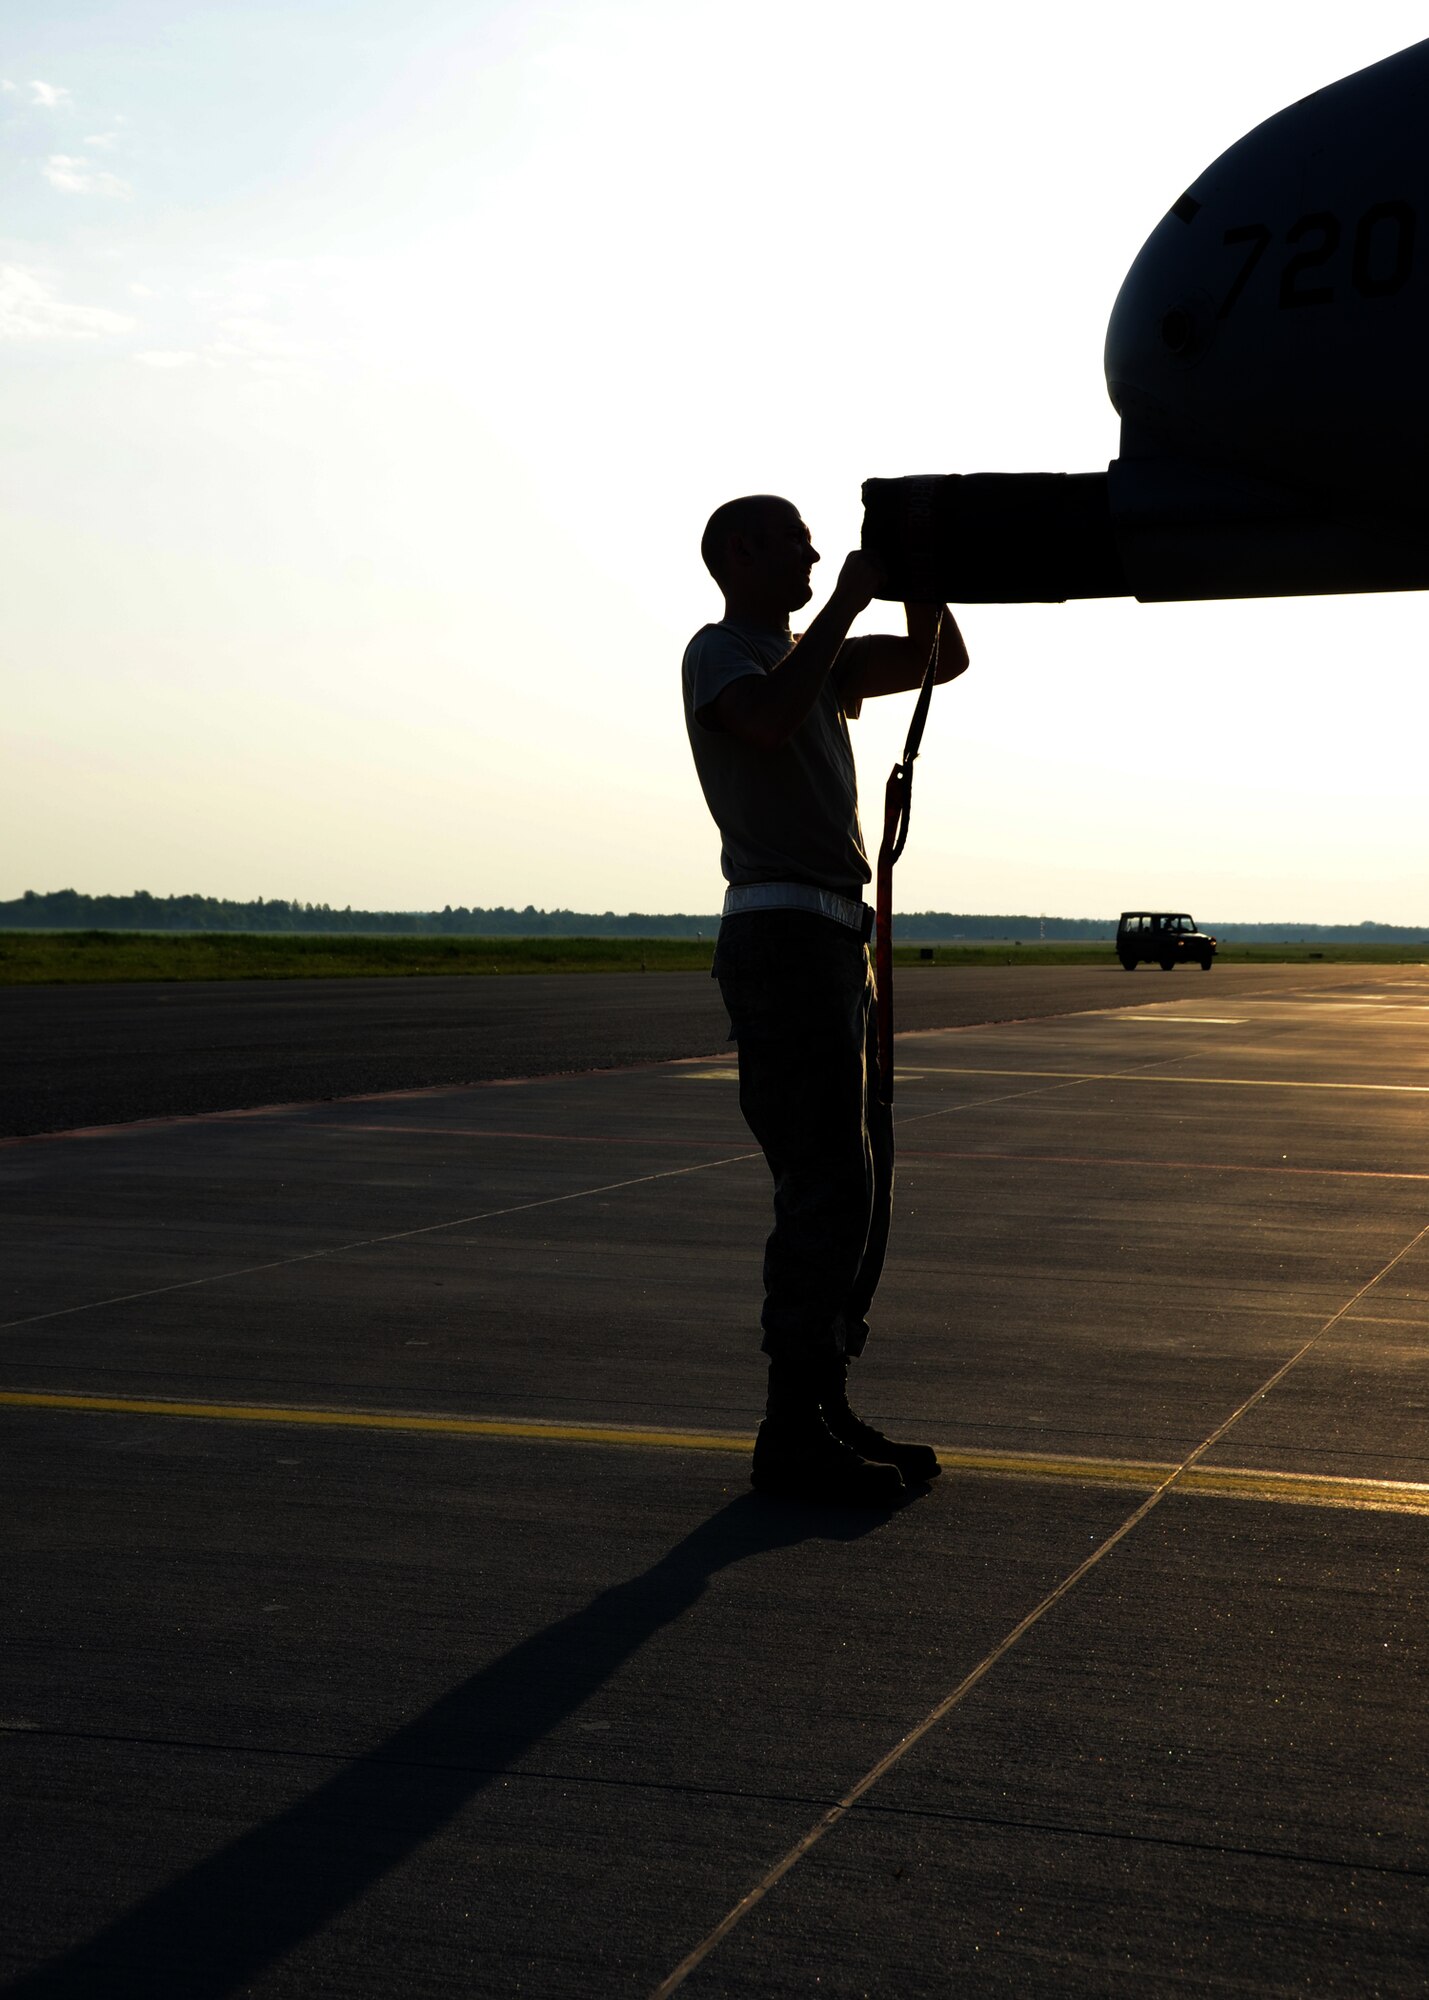 U.S. Air Force Senior Airman Bryan Sieling, a crew chief assigned to 175th Aircraft Maintenance Squadron, Maryland Air National Guard, prepares to launch an A-10C Thunderbolt II for a training mission at the start of Saber Strike at Amari Air Base, Estonia on June 3, 2013. Saber Strike 2013 is a multinational exercise involving approximately 2,000 personnel from 14 countries and is designed to improve NATO interoperability and strengthen the relationships between military forces of the U.S., Estonia and other participating nations. (U.S. Air National Guard photo by Staff Sgt. Benjamin Hughes)